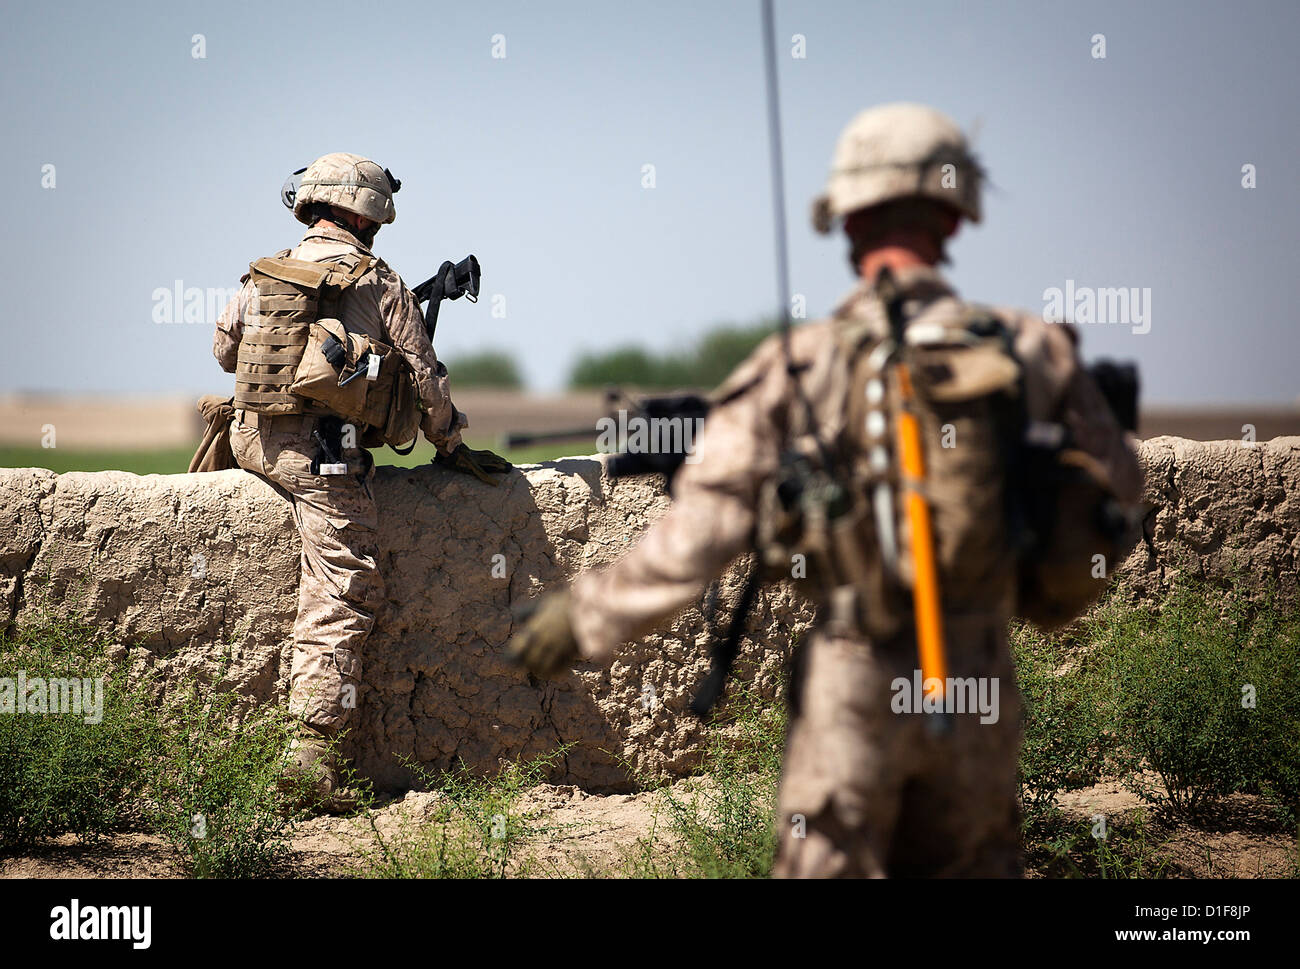 Two US Marines climb a wall separating two fields during a security patrol April 30, 2012 in Durzay, Afghanistan. Stock Photo